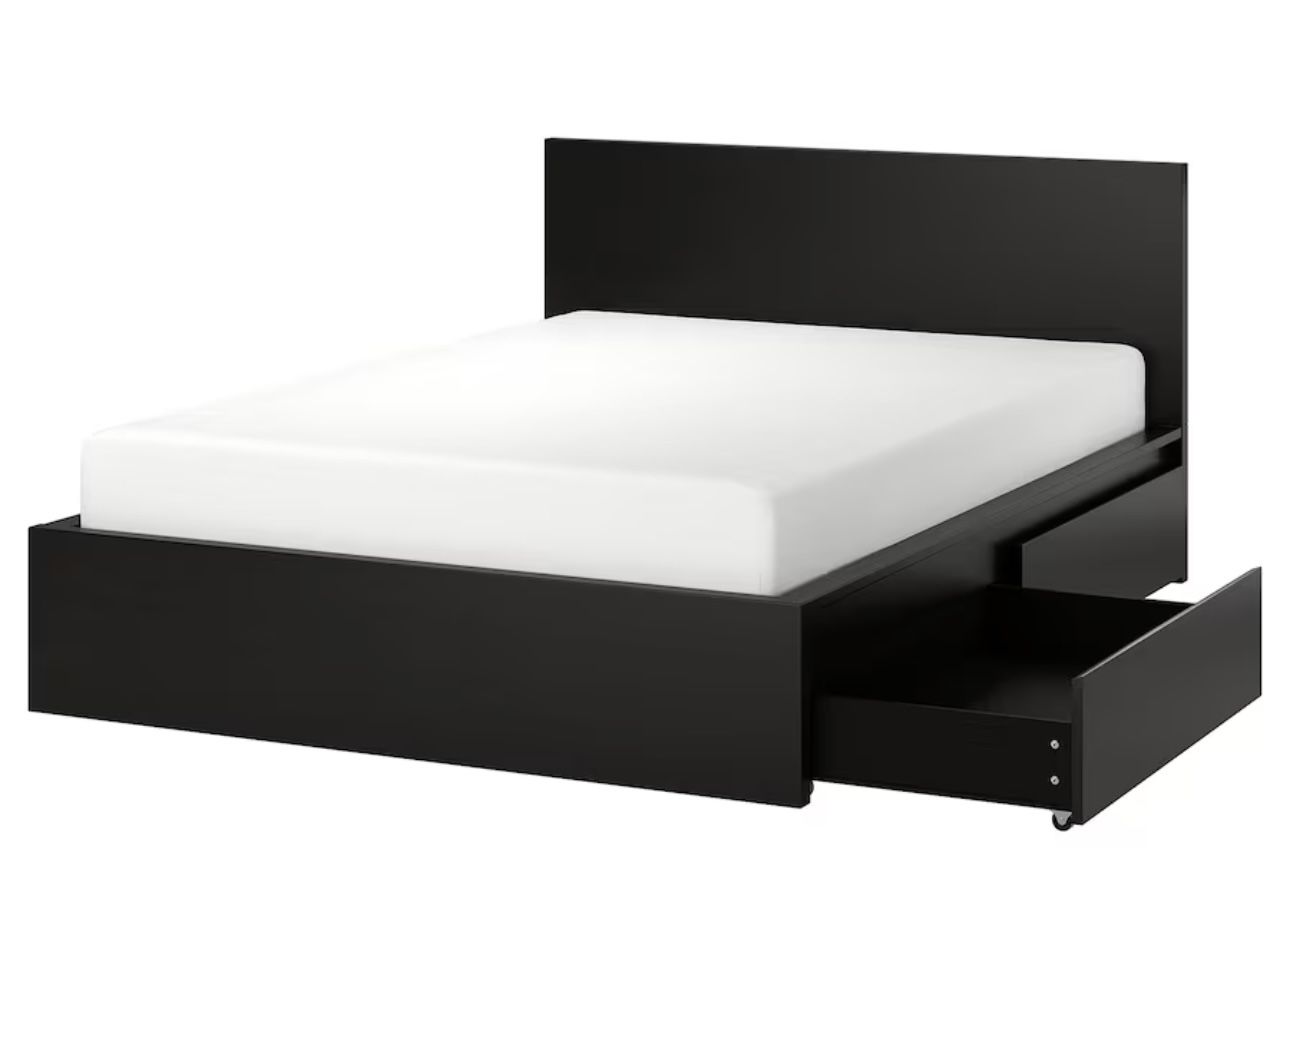 Ikea Malm Bed Frame With 2 Drawers